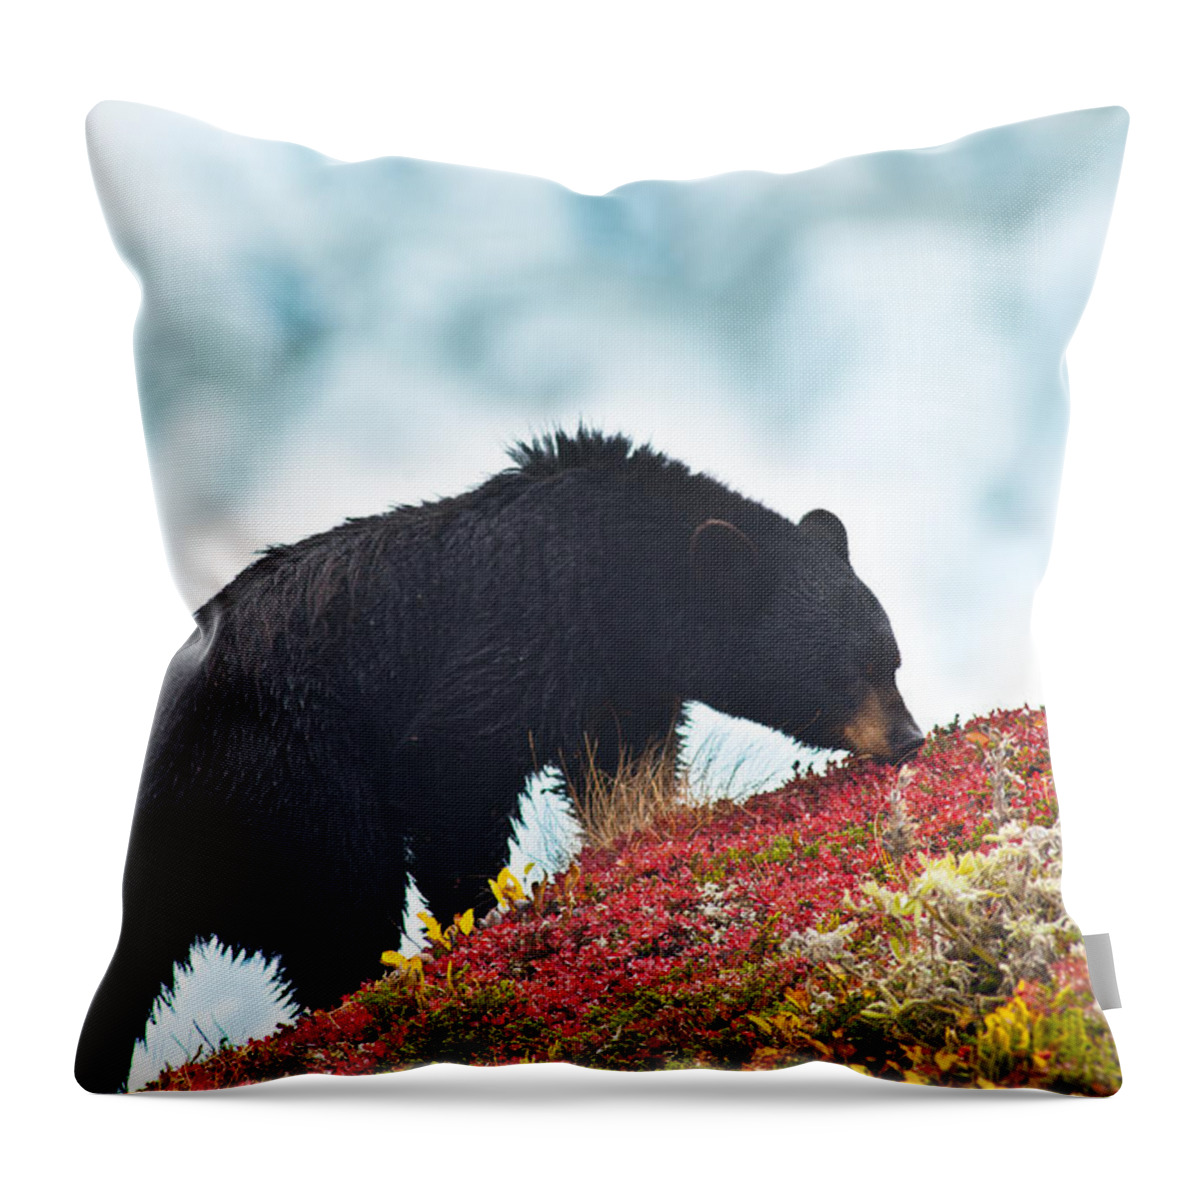 Ice Throw Pillow featuring the photograph A Black Bear Is Feeding On Berries On A by Michael Jones